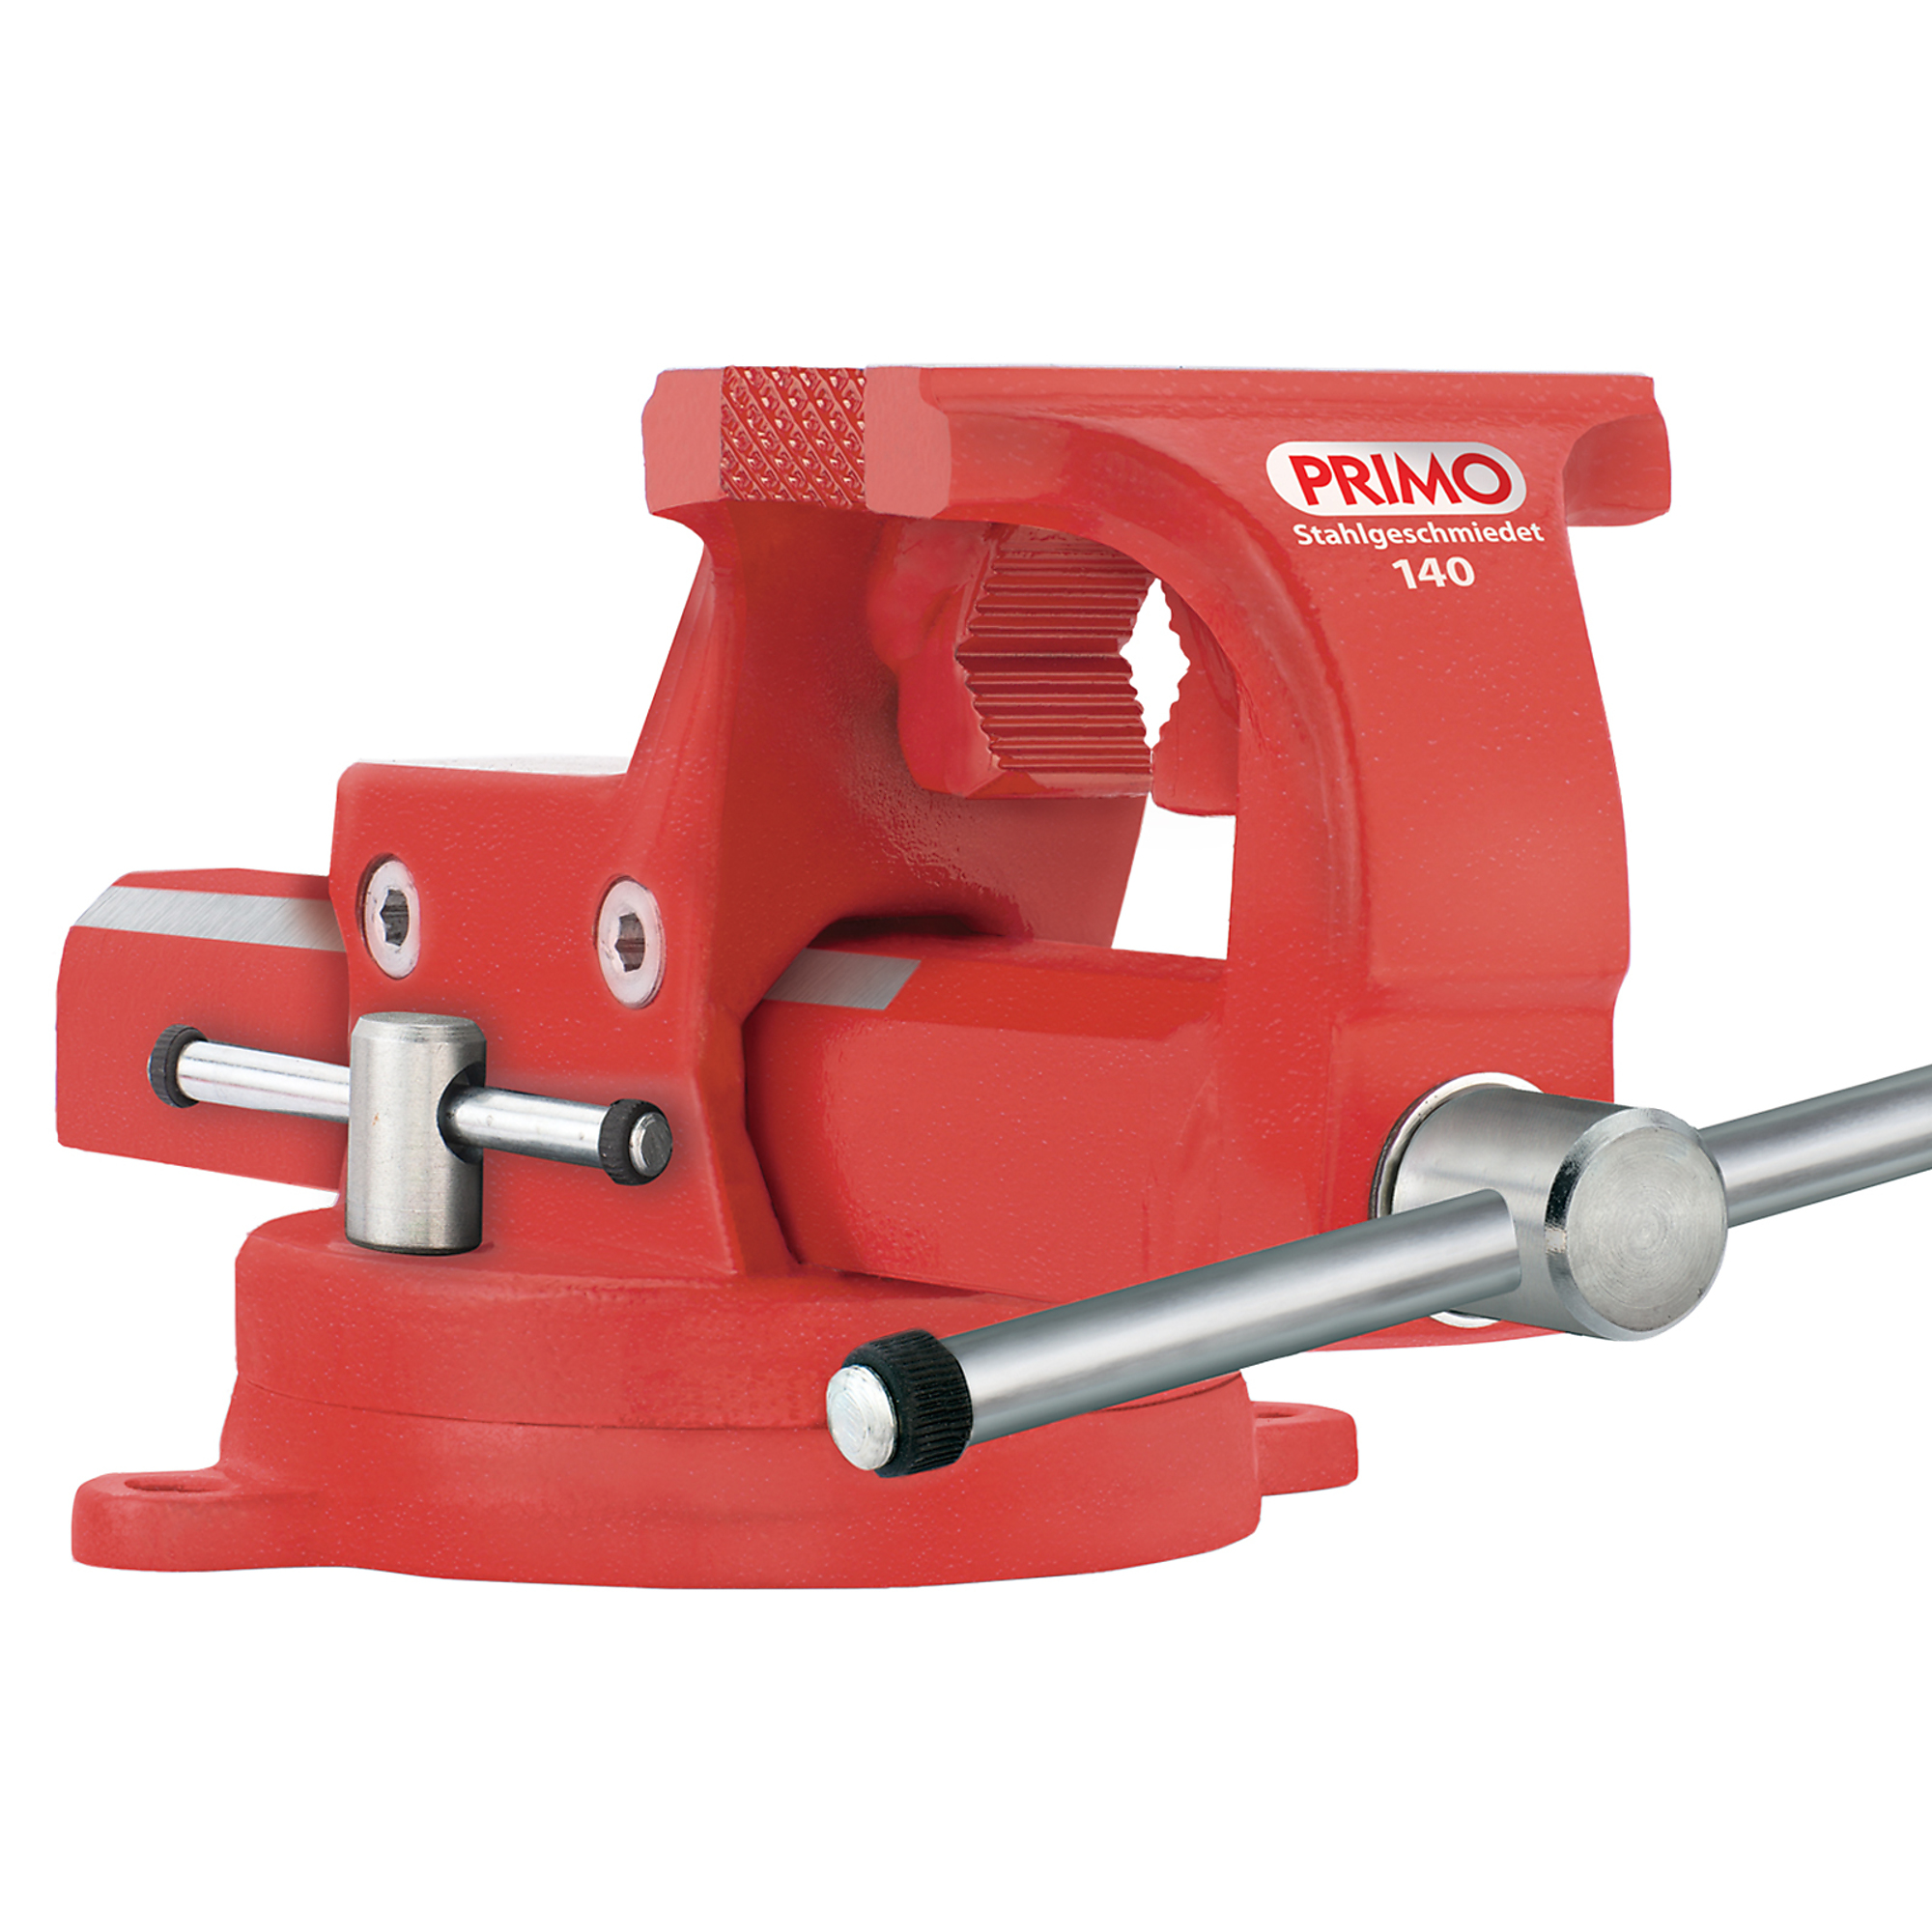 KANCA, PRIMO PLUMBERS VISE w. SWIVEL BASE 100 MM - 4Inch, Jaw Width 4 in, Jaw Capacity 4.5 in, Model Primo Pipe and Bench Vise